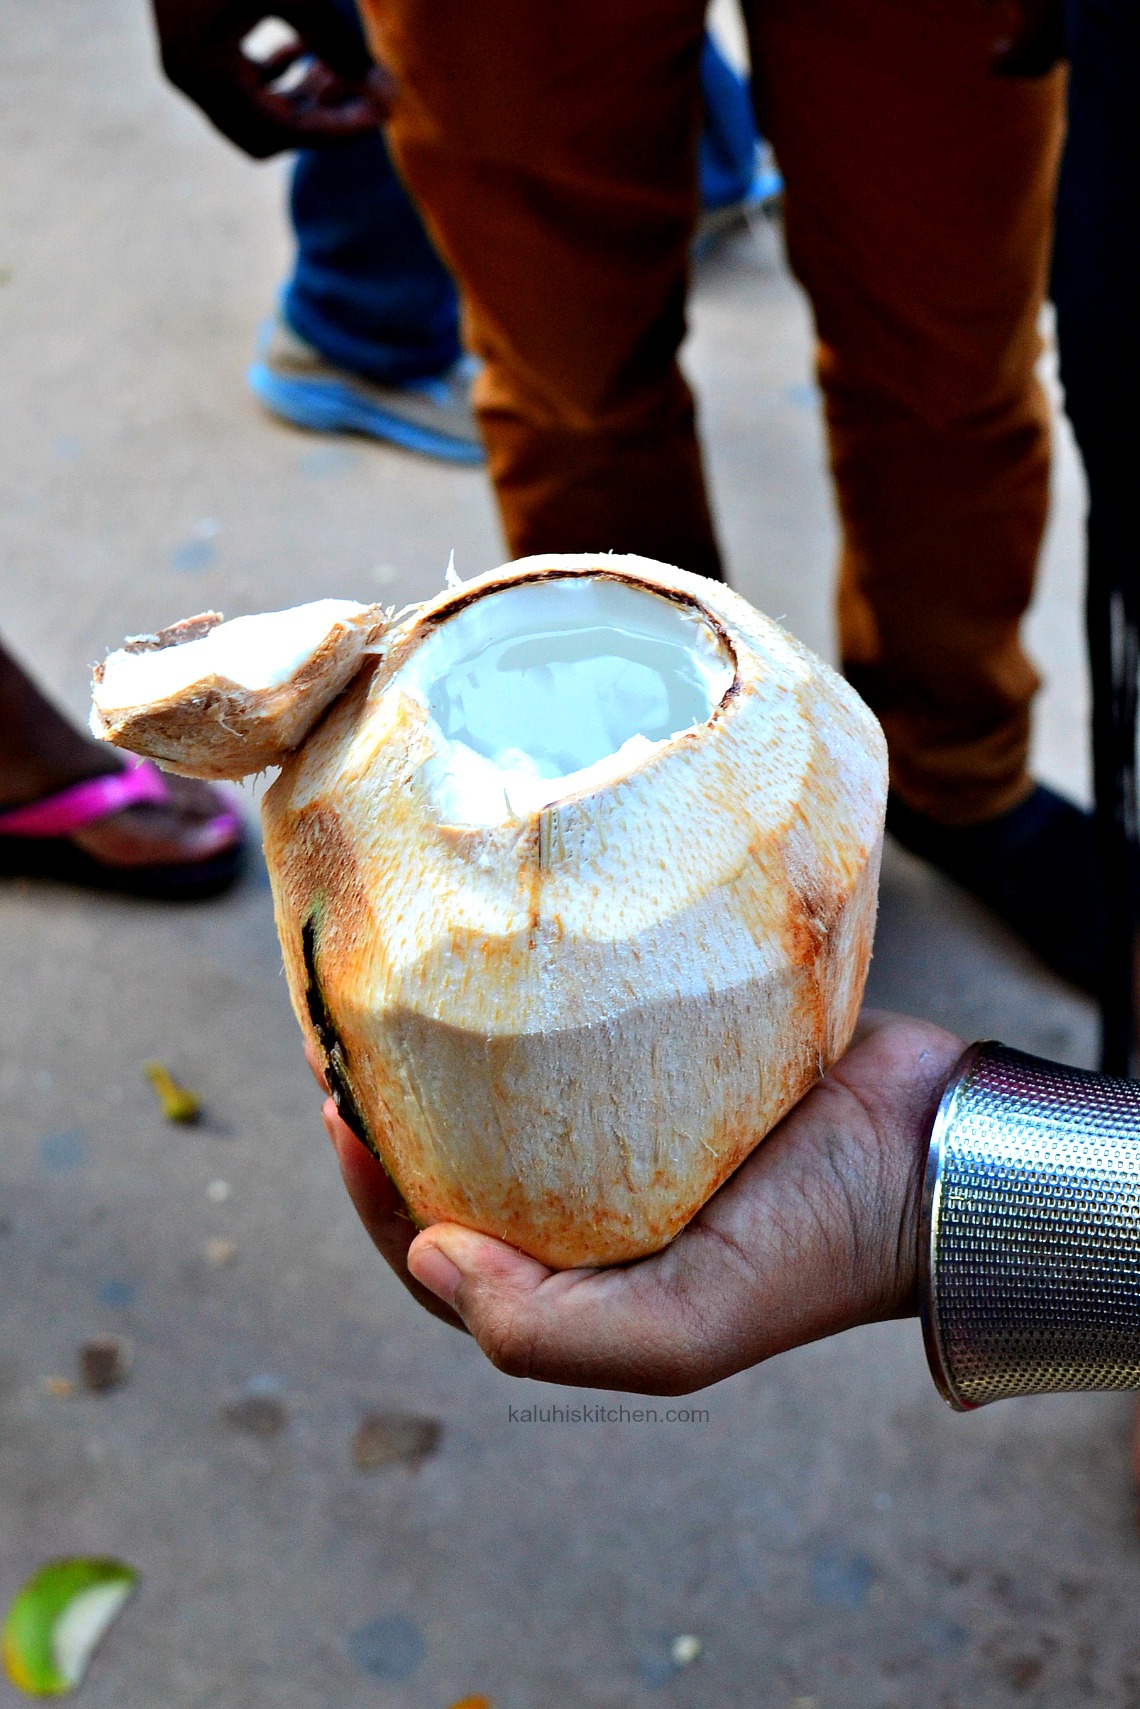 madafu refers to the water within a coconut used as a drink to quench the thirst of both kenyans and locals_kaluhiskitchen.com_lamu food festival